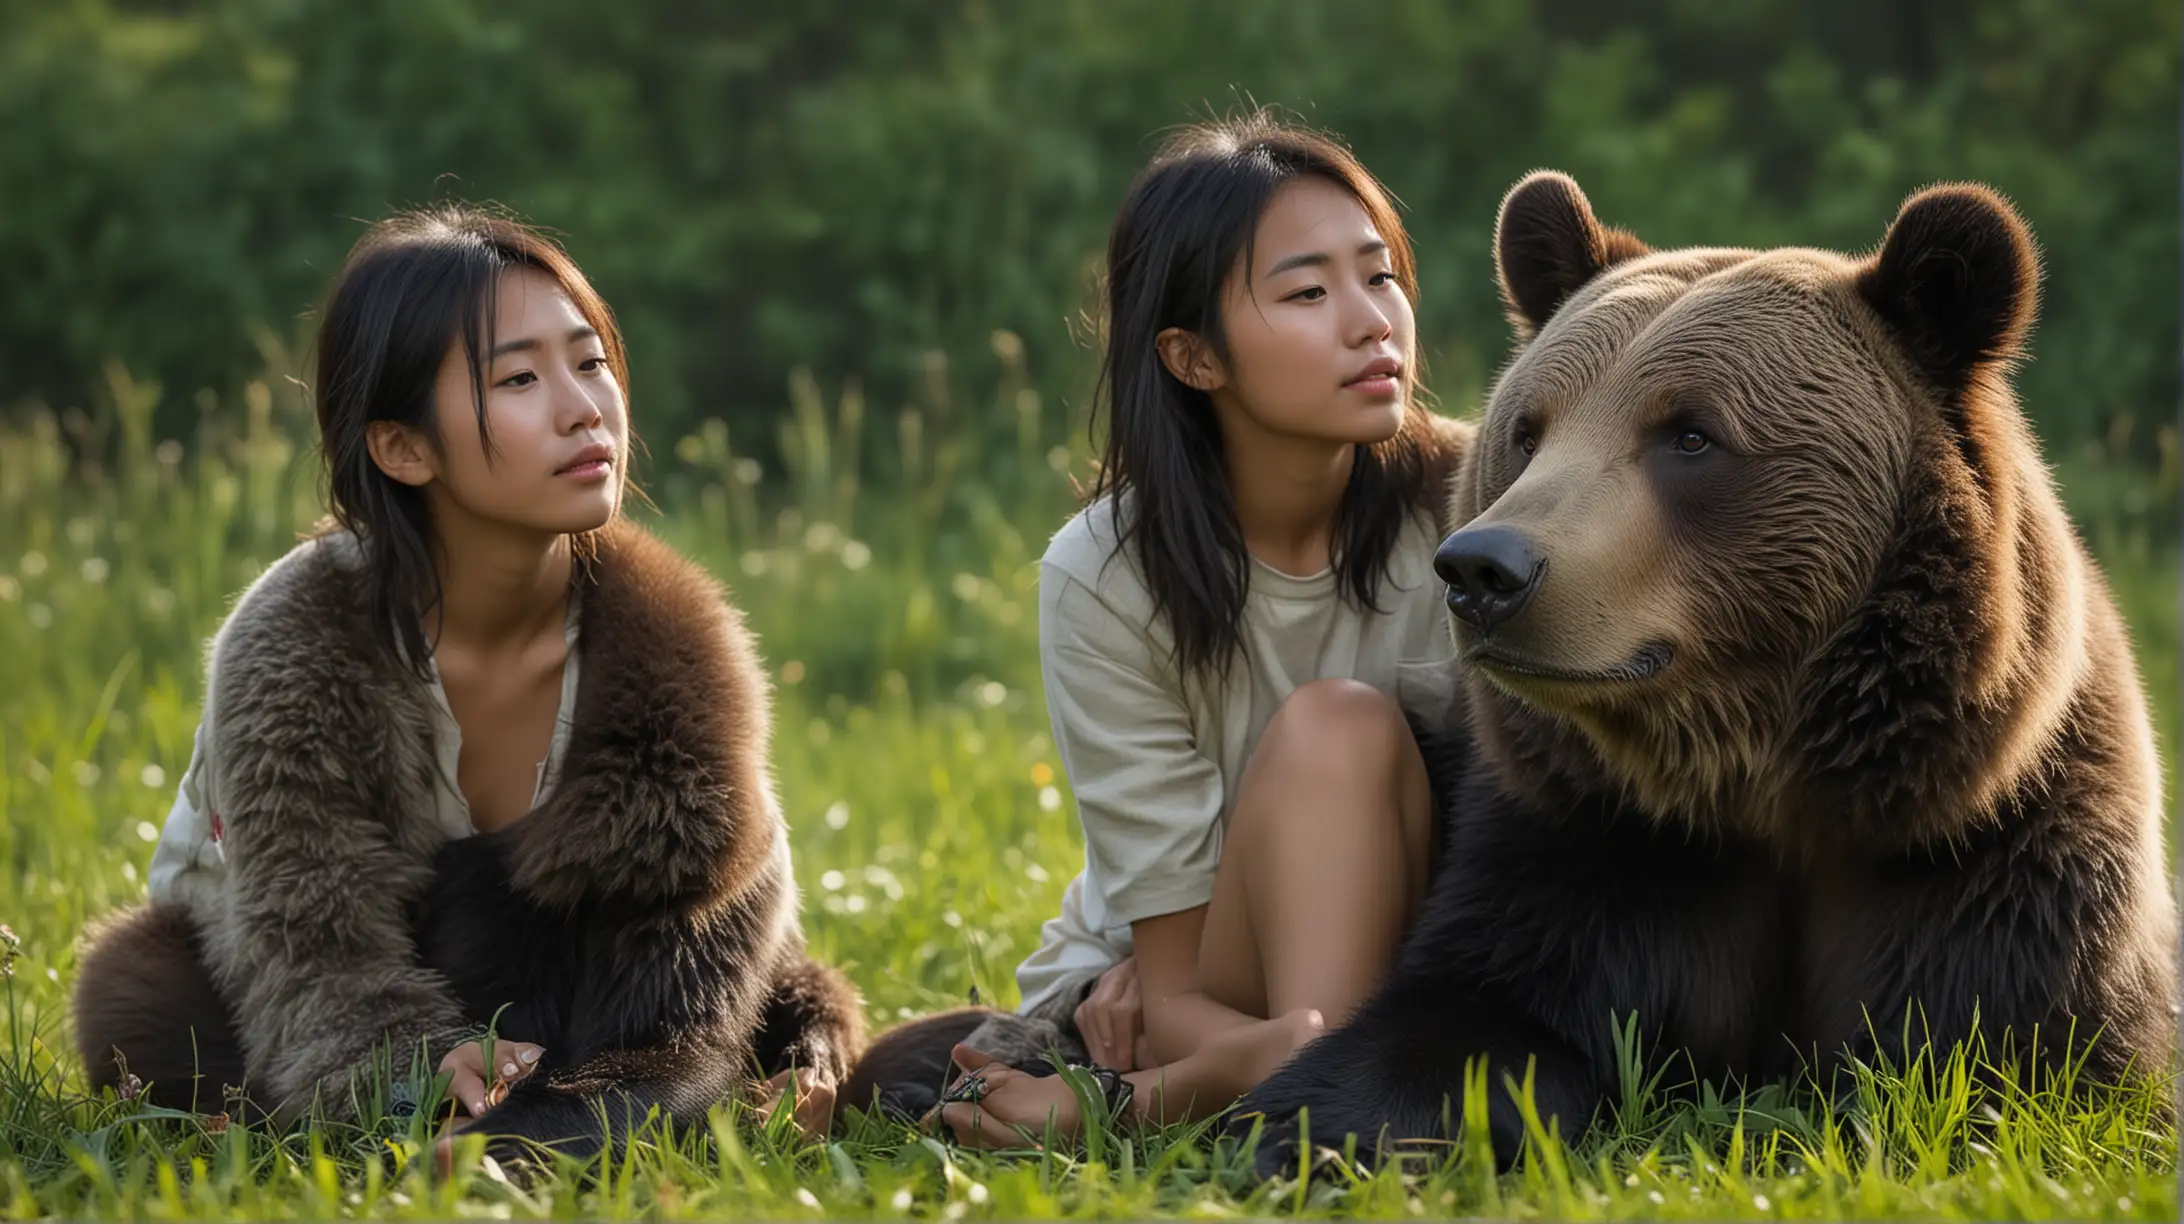 CloseUp Wildlife Photography Chinese Girl and Bear in Serene Grass Setting